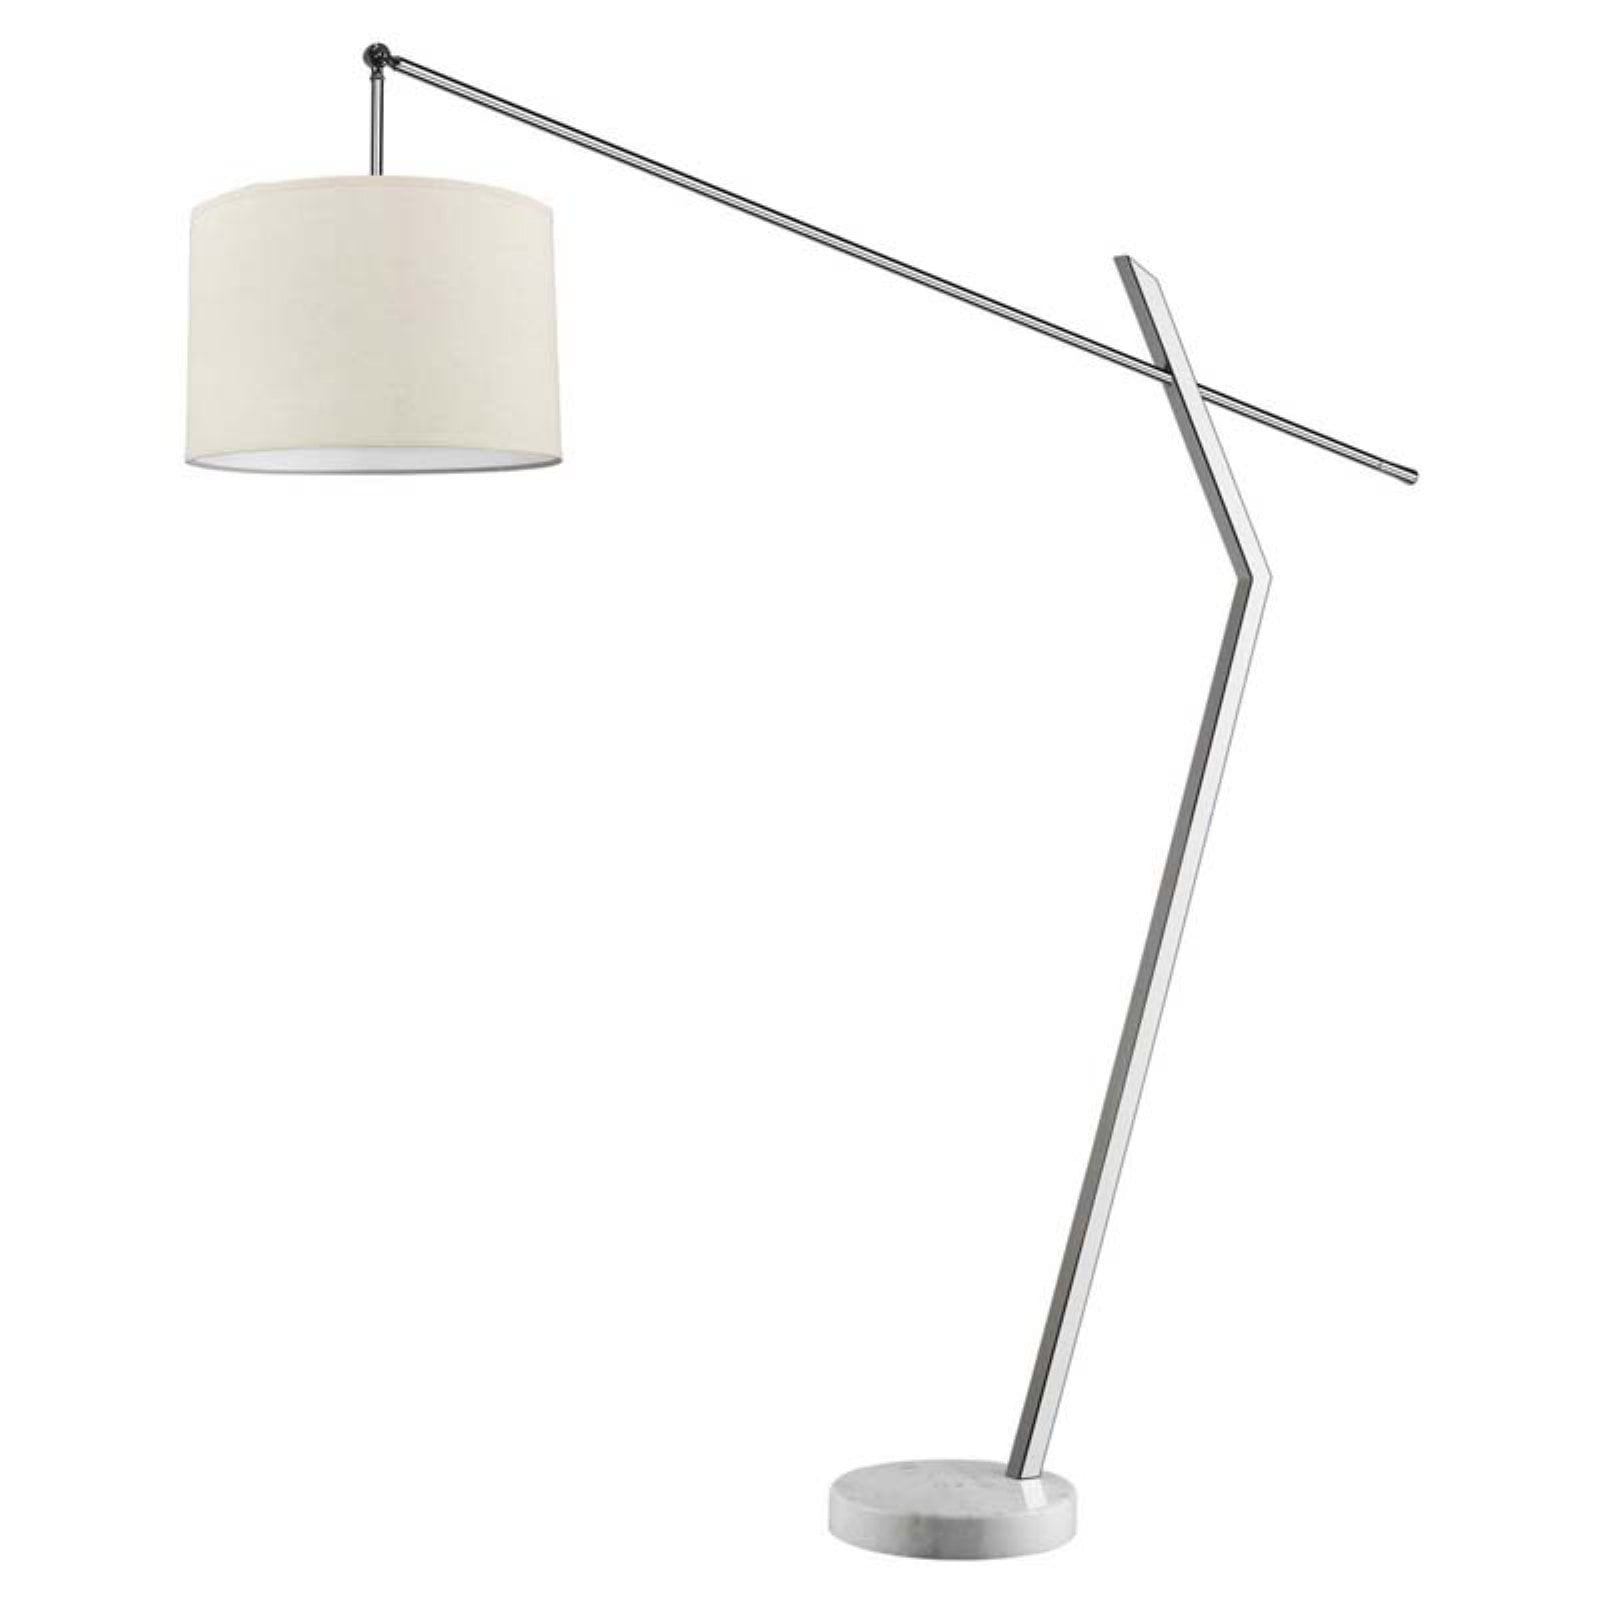 Trend By Acclaim Lighting Chelsea Arc, Cb2 Arc Lamp Assembly